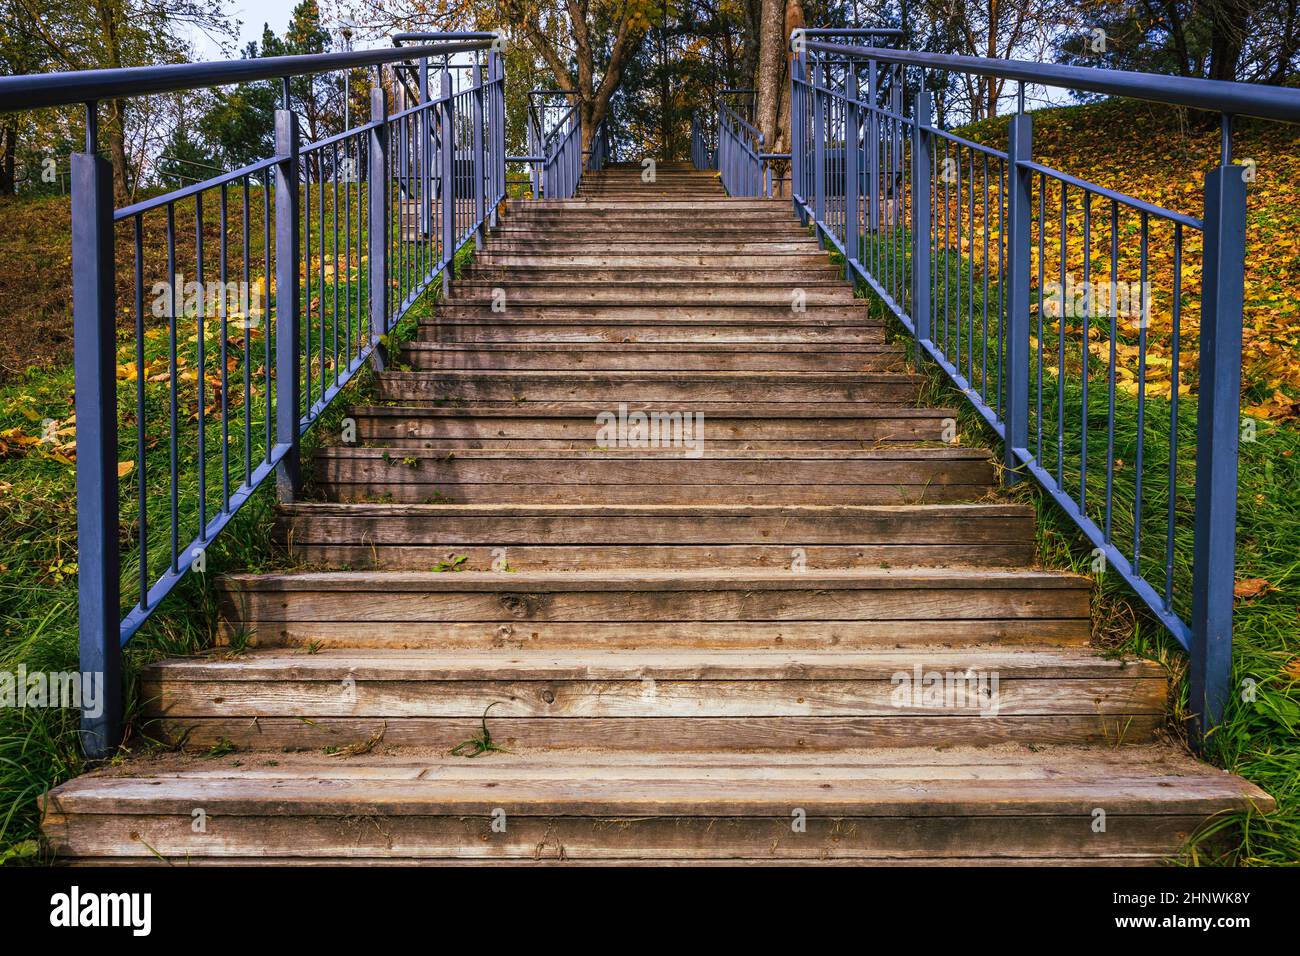 https://c8.alamy.com/comp/2HNWK8Y/wooden-staircase-with-stainless-steel-railing-in-the-park-2HNWK8Y.jpg